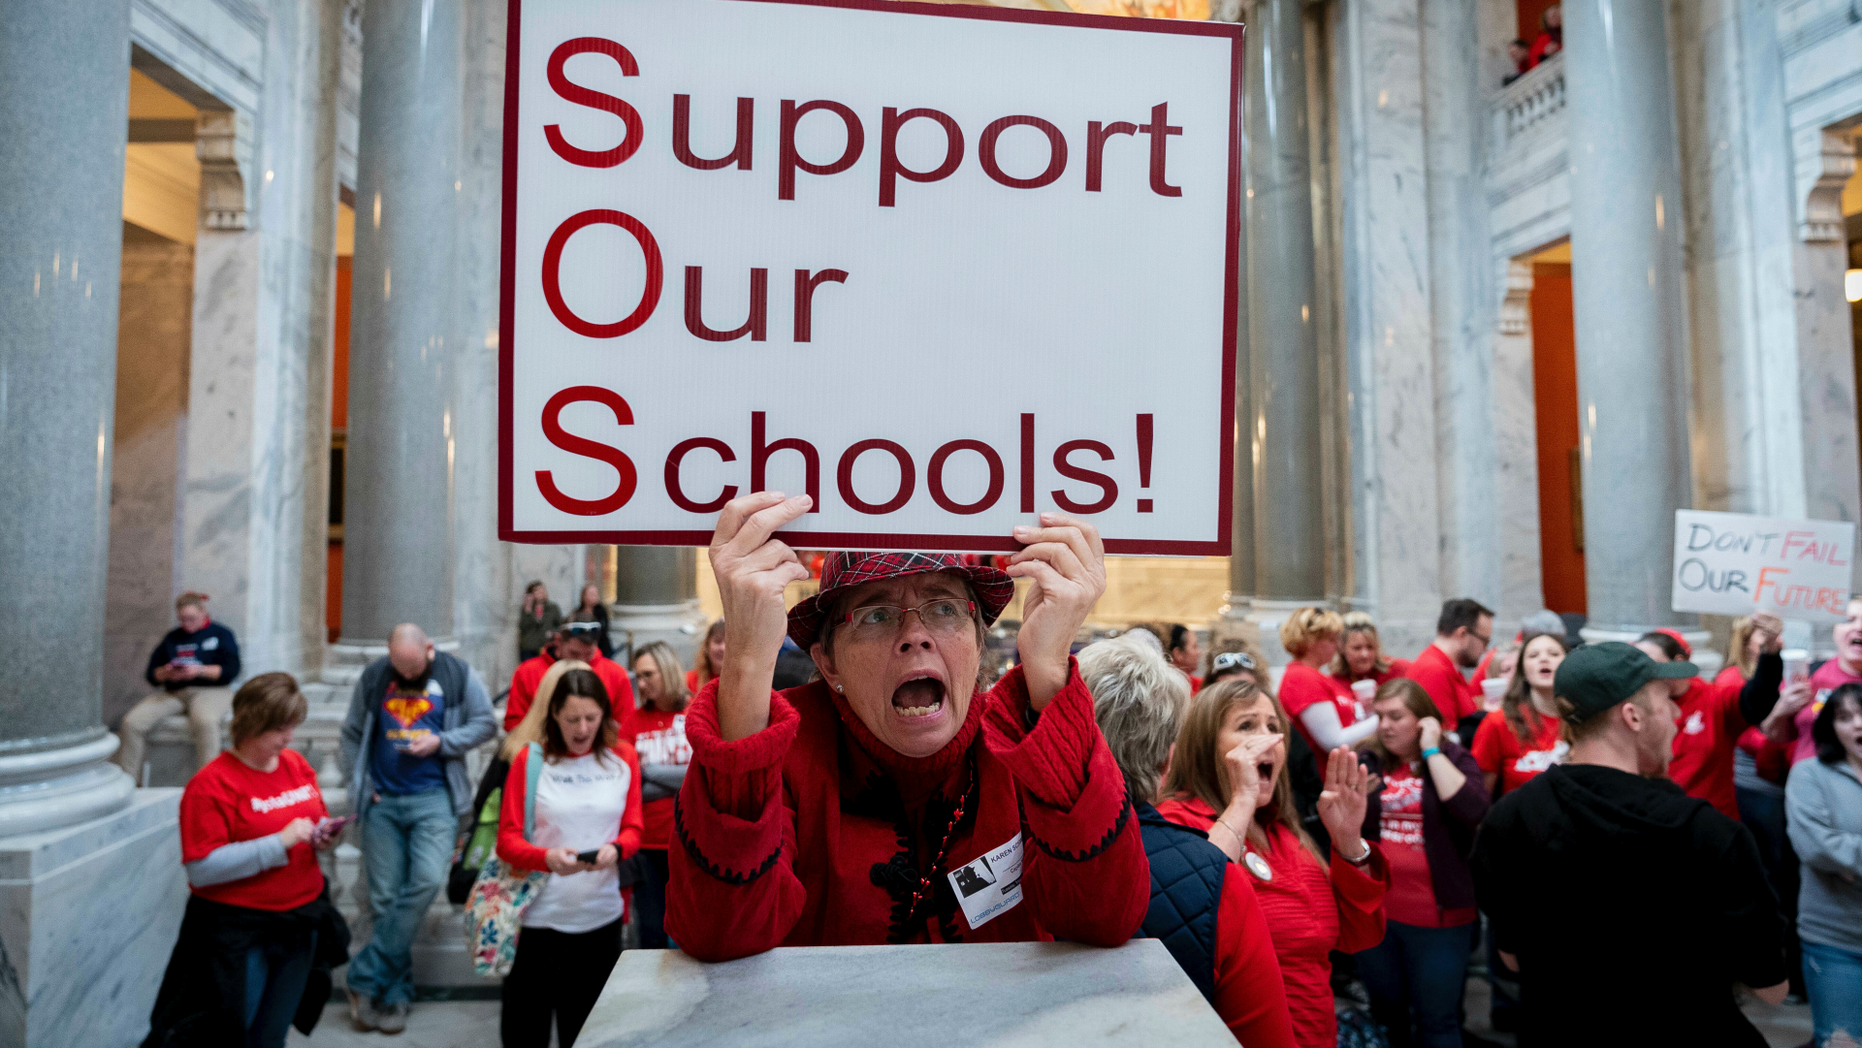 Karen Schwartz, a teacher at the Phoenix School of Discovery in Louisville, stands alongside other teachers and their supporters to protest the attacks on public education in Frankfort, Ky on Tuesday, March 12, 2019 (AP Photo / Bryan Woolston)